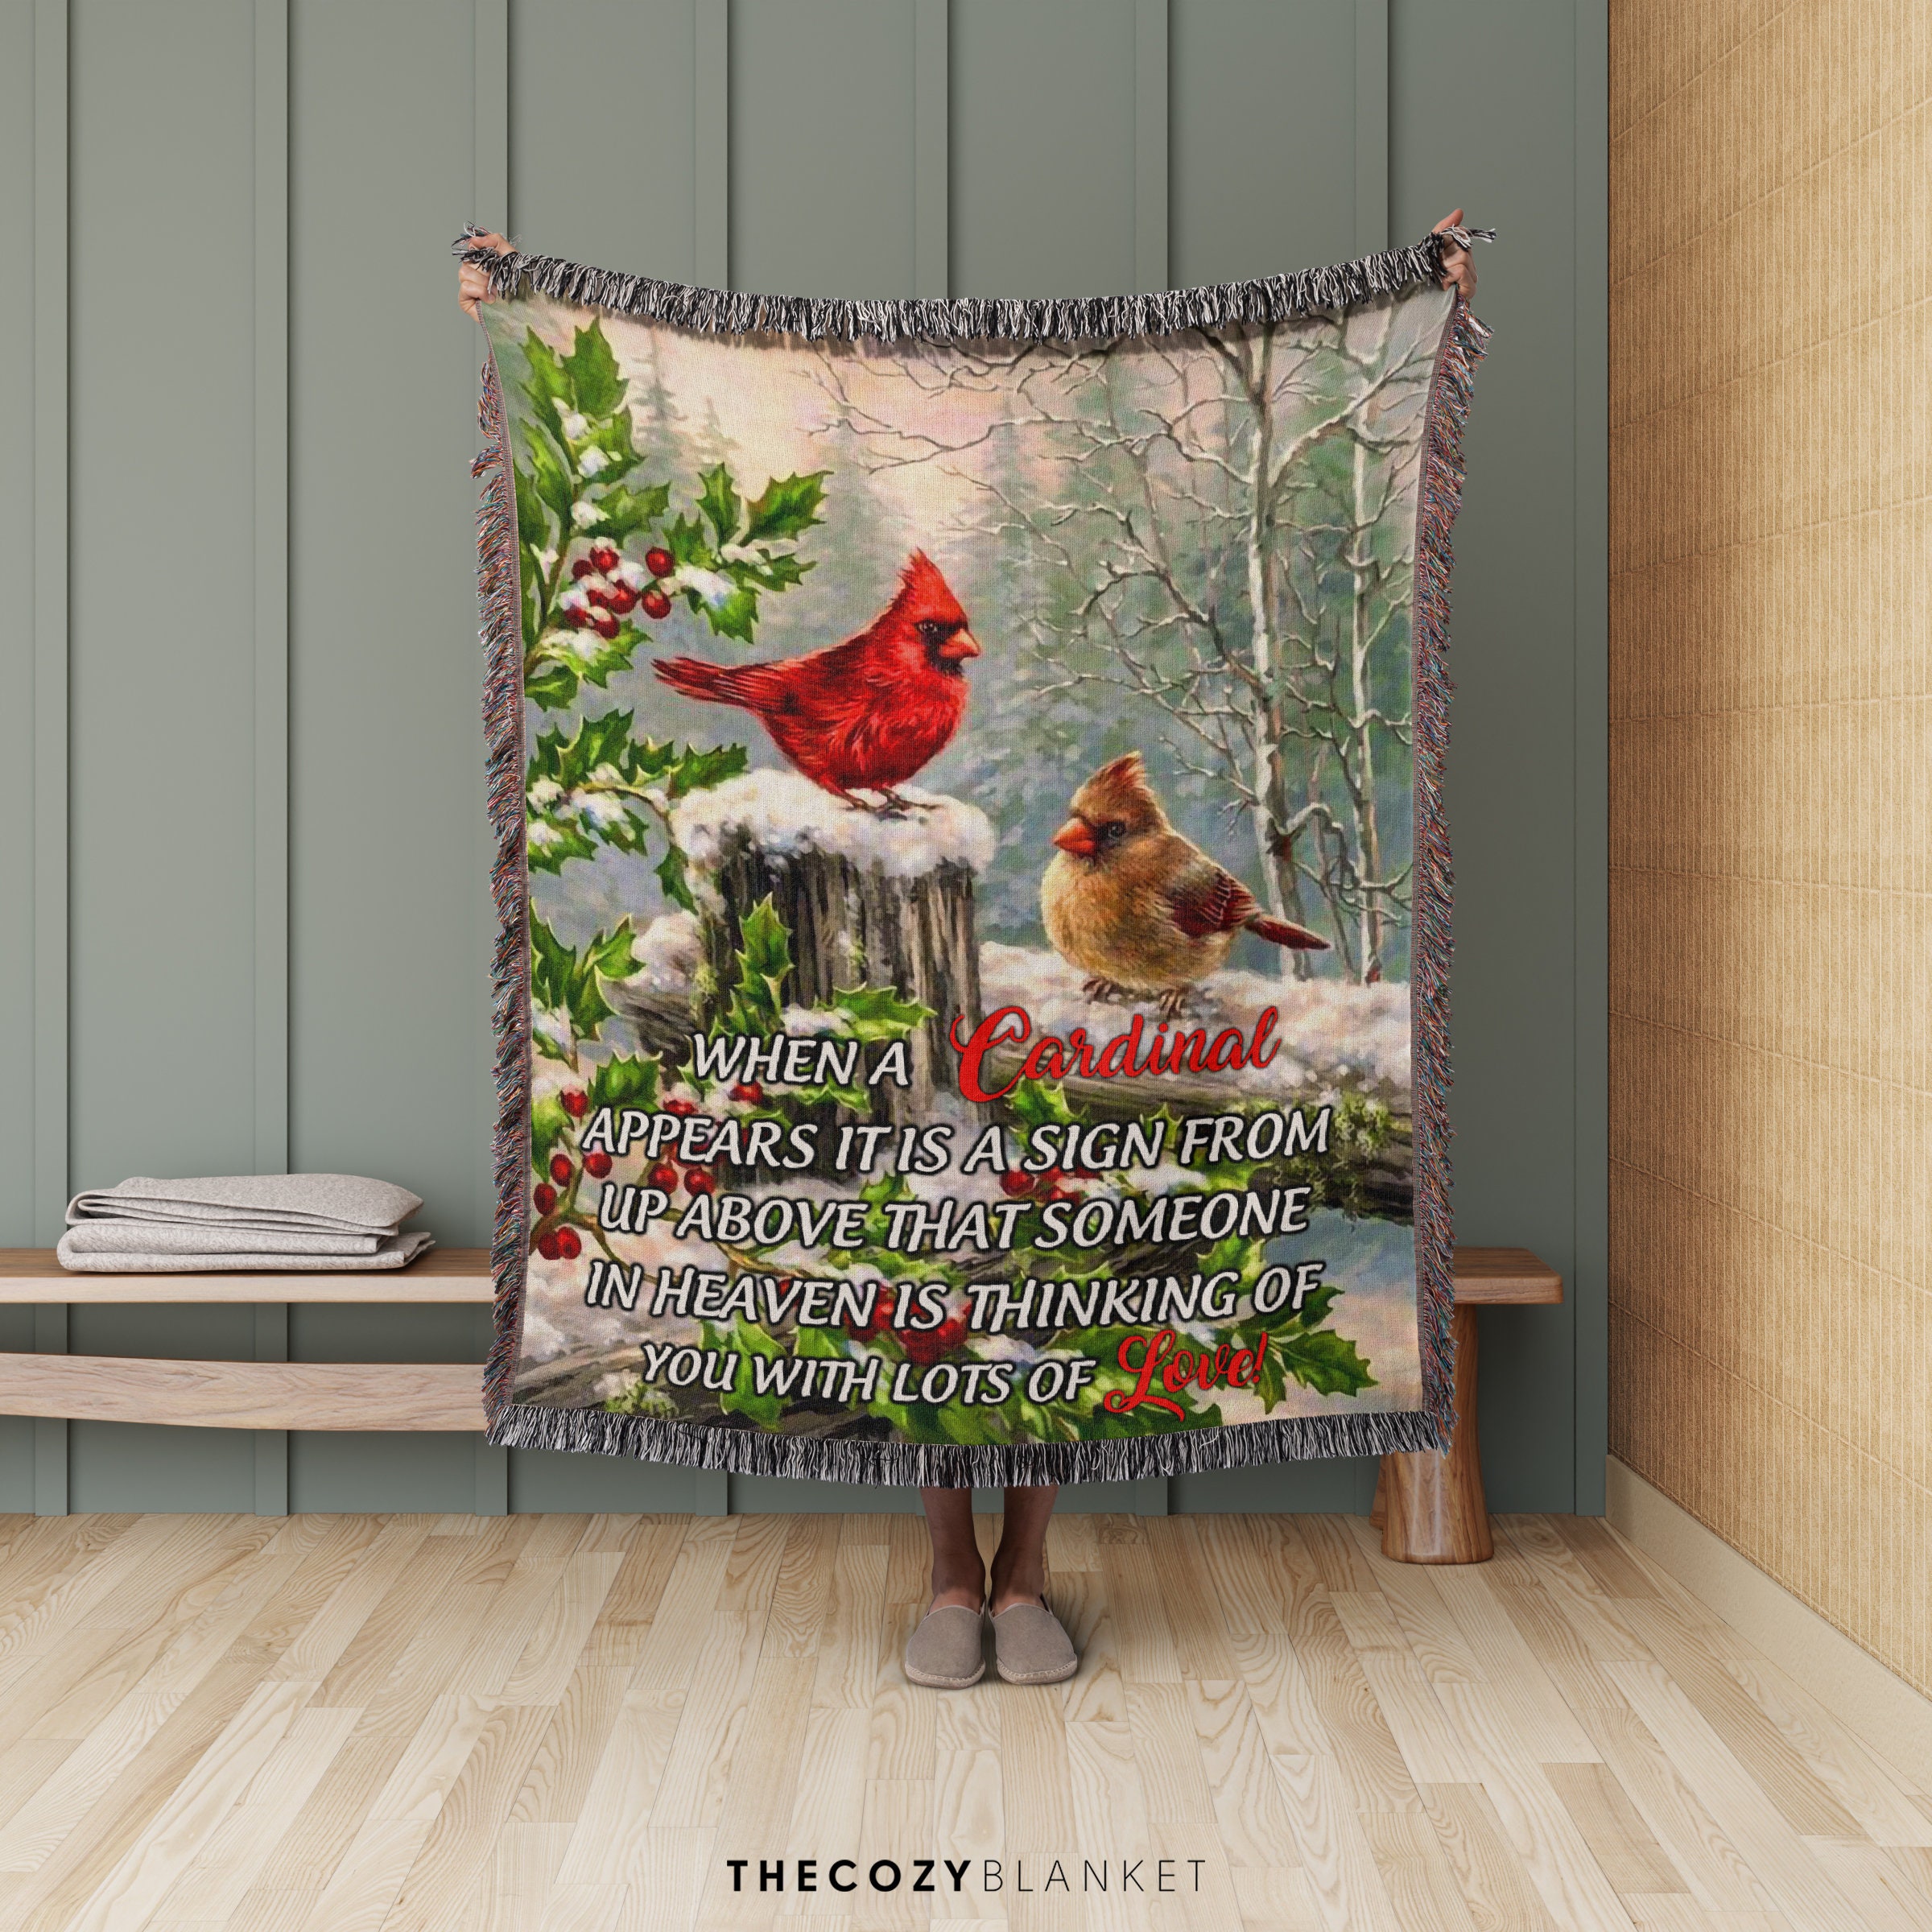 UNIVERSITY OF LOUISVILLE CARDINALS TAPESTRY COLLEGE AFGHAN THROW